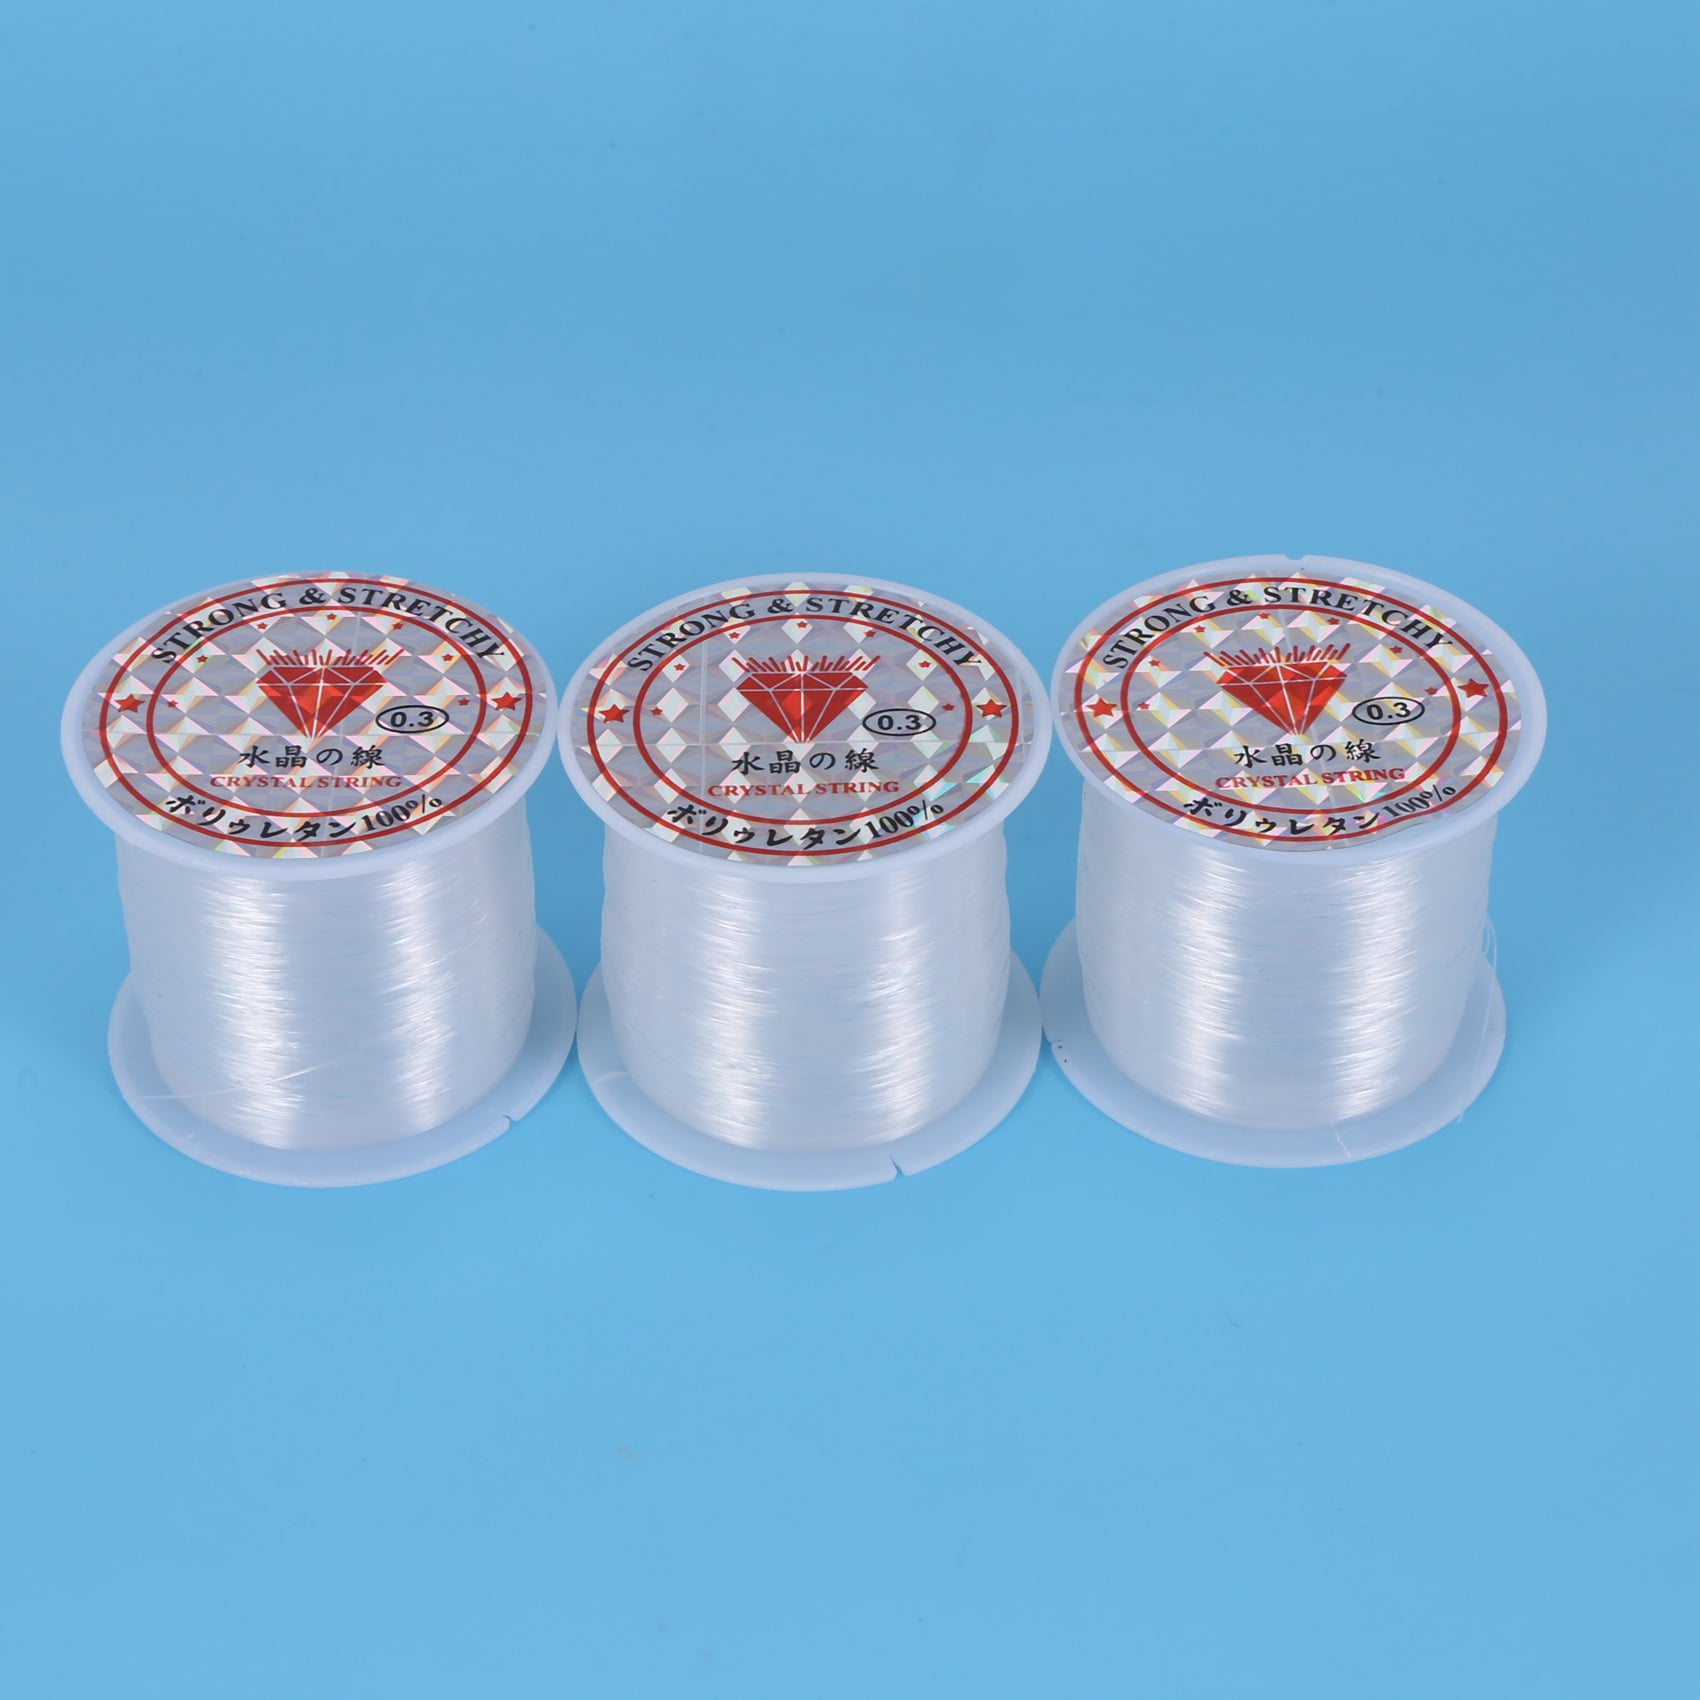 Fishing Wire, Selizo 3 Rolls Clear Fishing Line Jewelry String